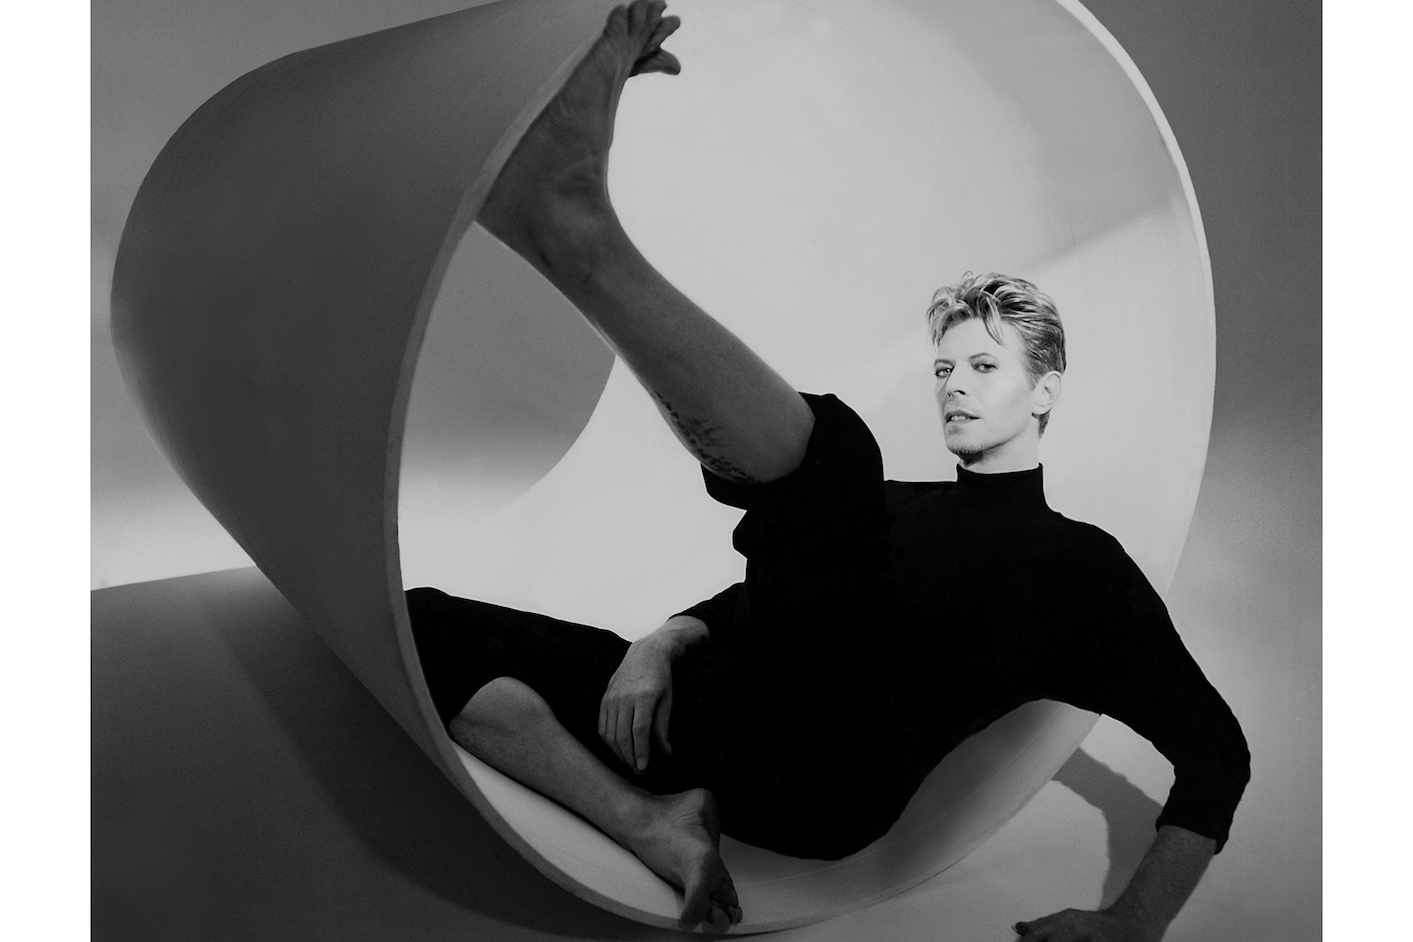 Bowie, Tubed, 1995